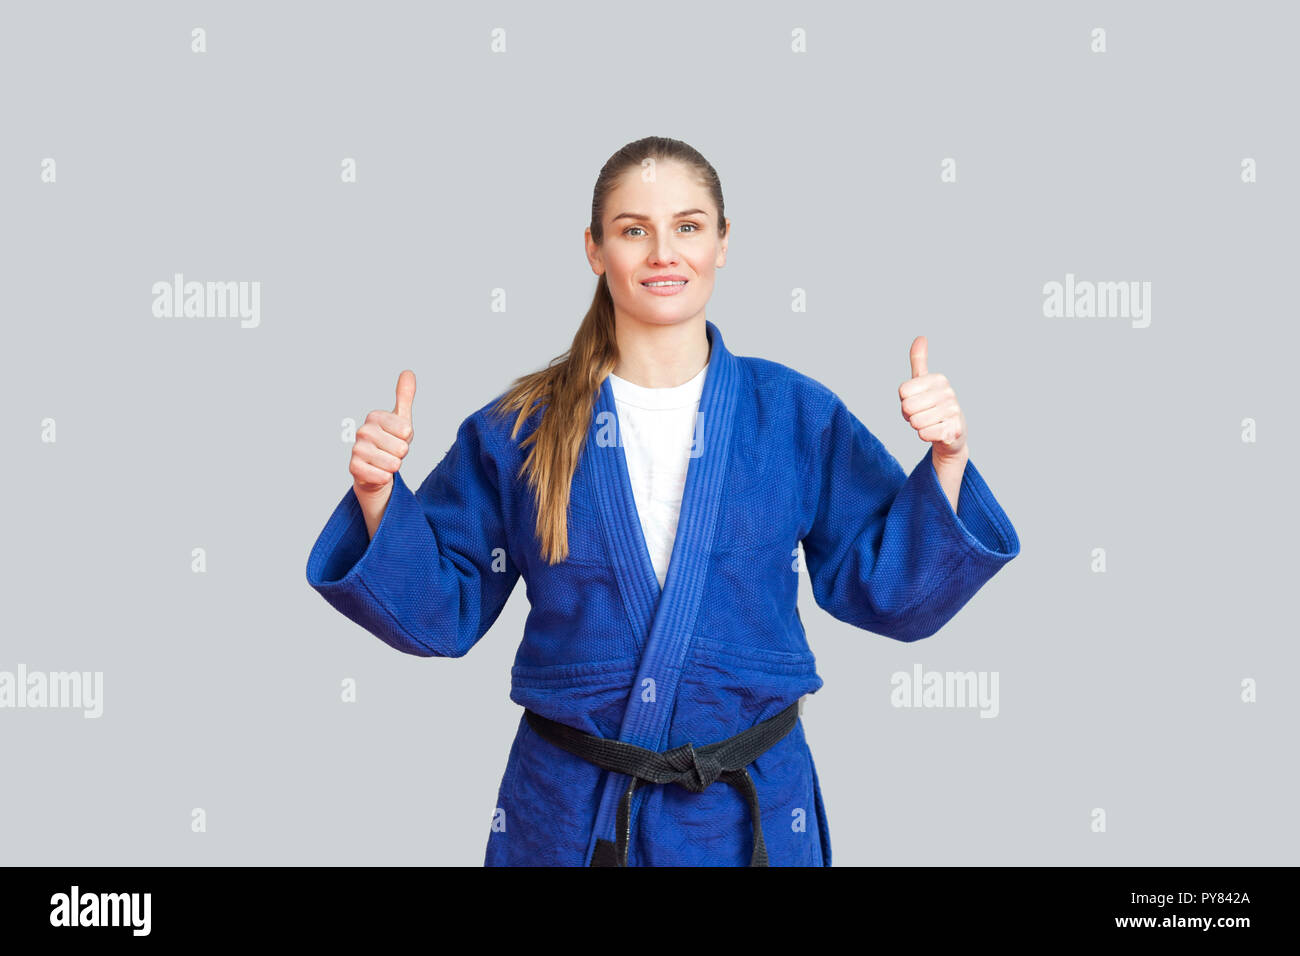 Positive athletic karate woman in blue kimono with black belt standing, showing thumbs up and looking at camera with toothy smile. Japanese martial ar Stock Photo